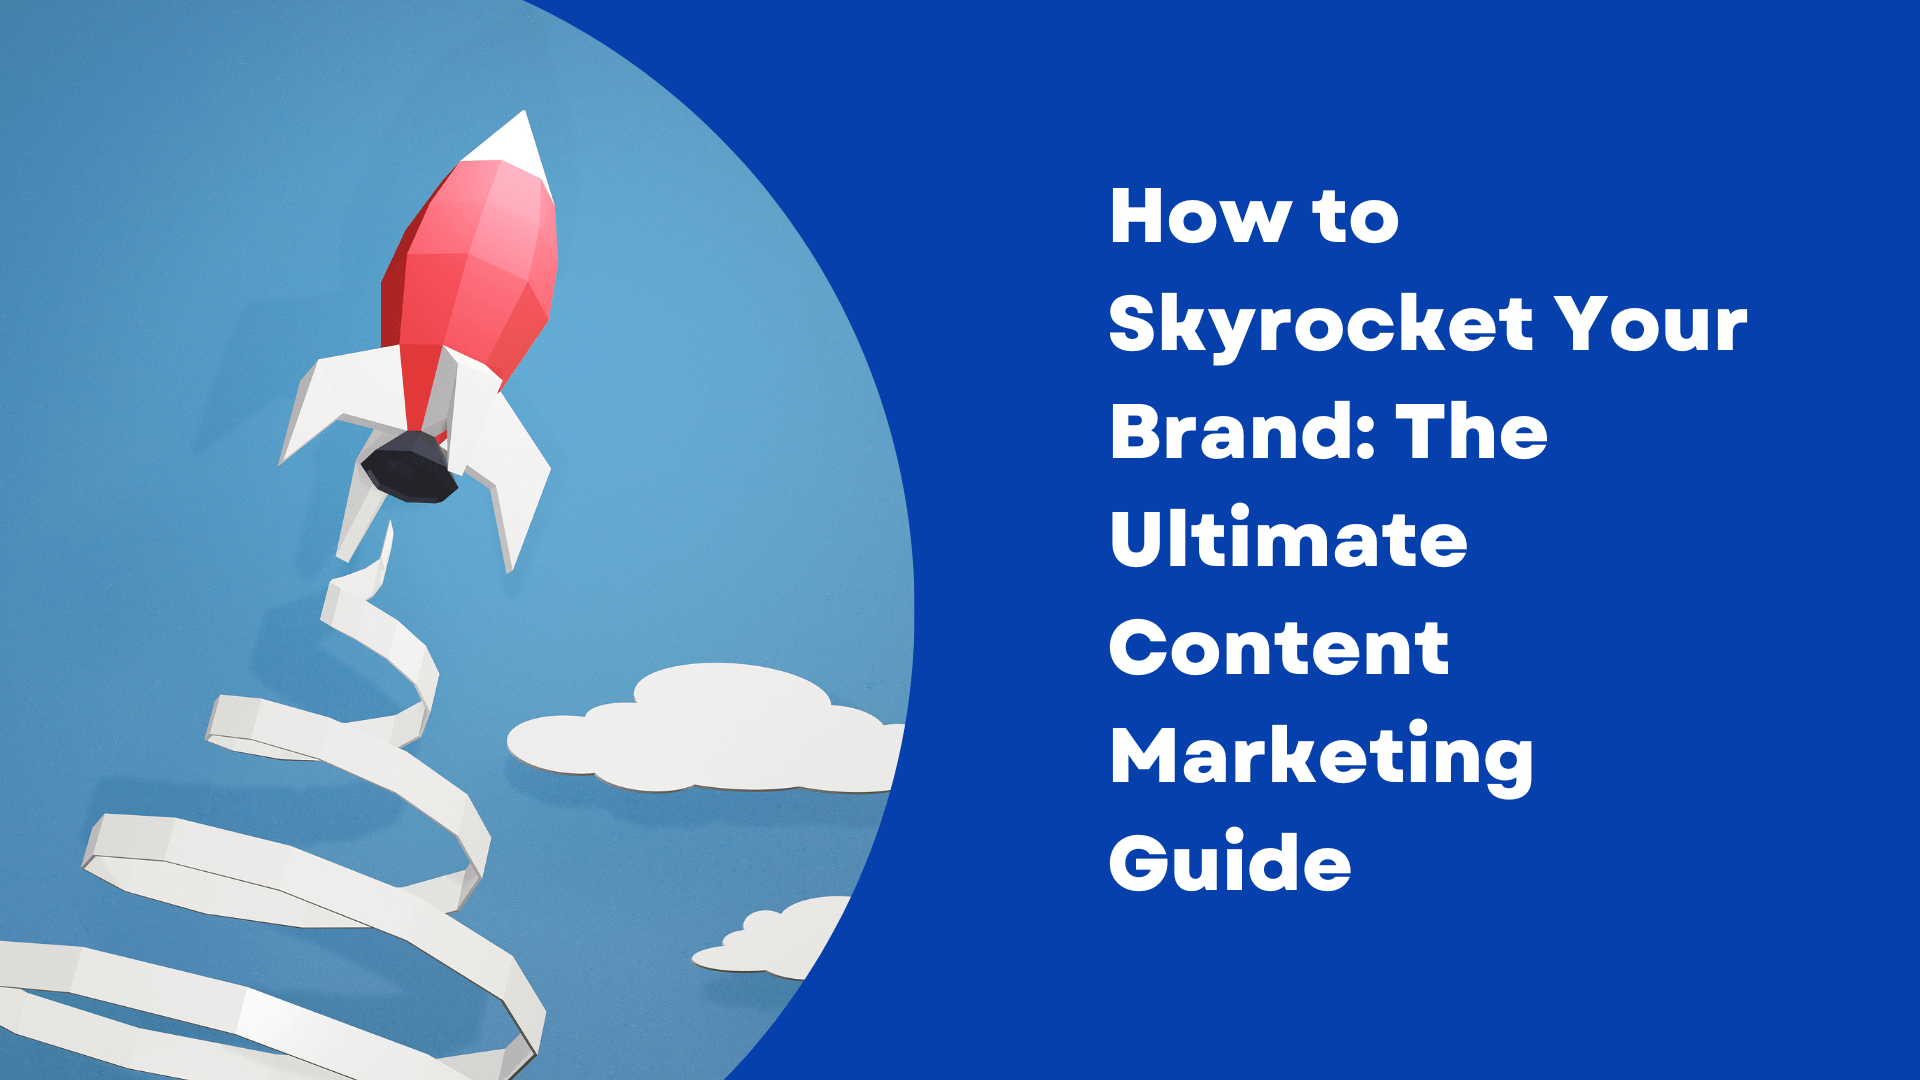 How to Skyrocket Your Brand: The Ultimate Content Marketing Guide